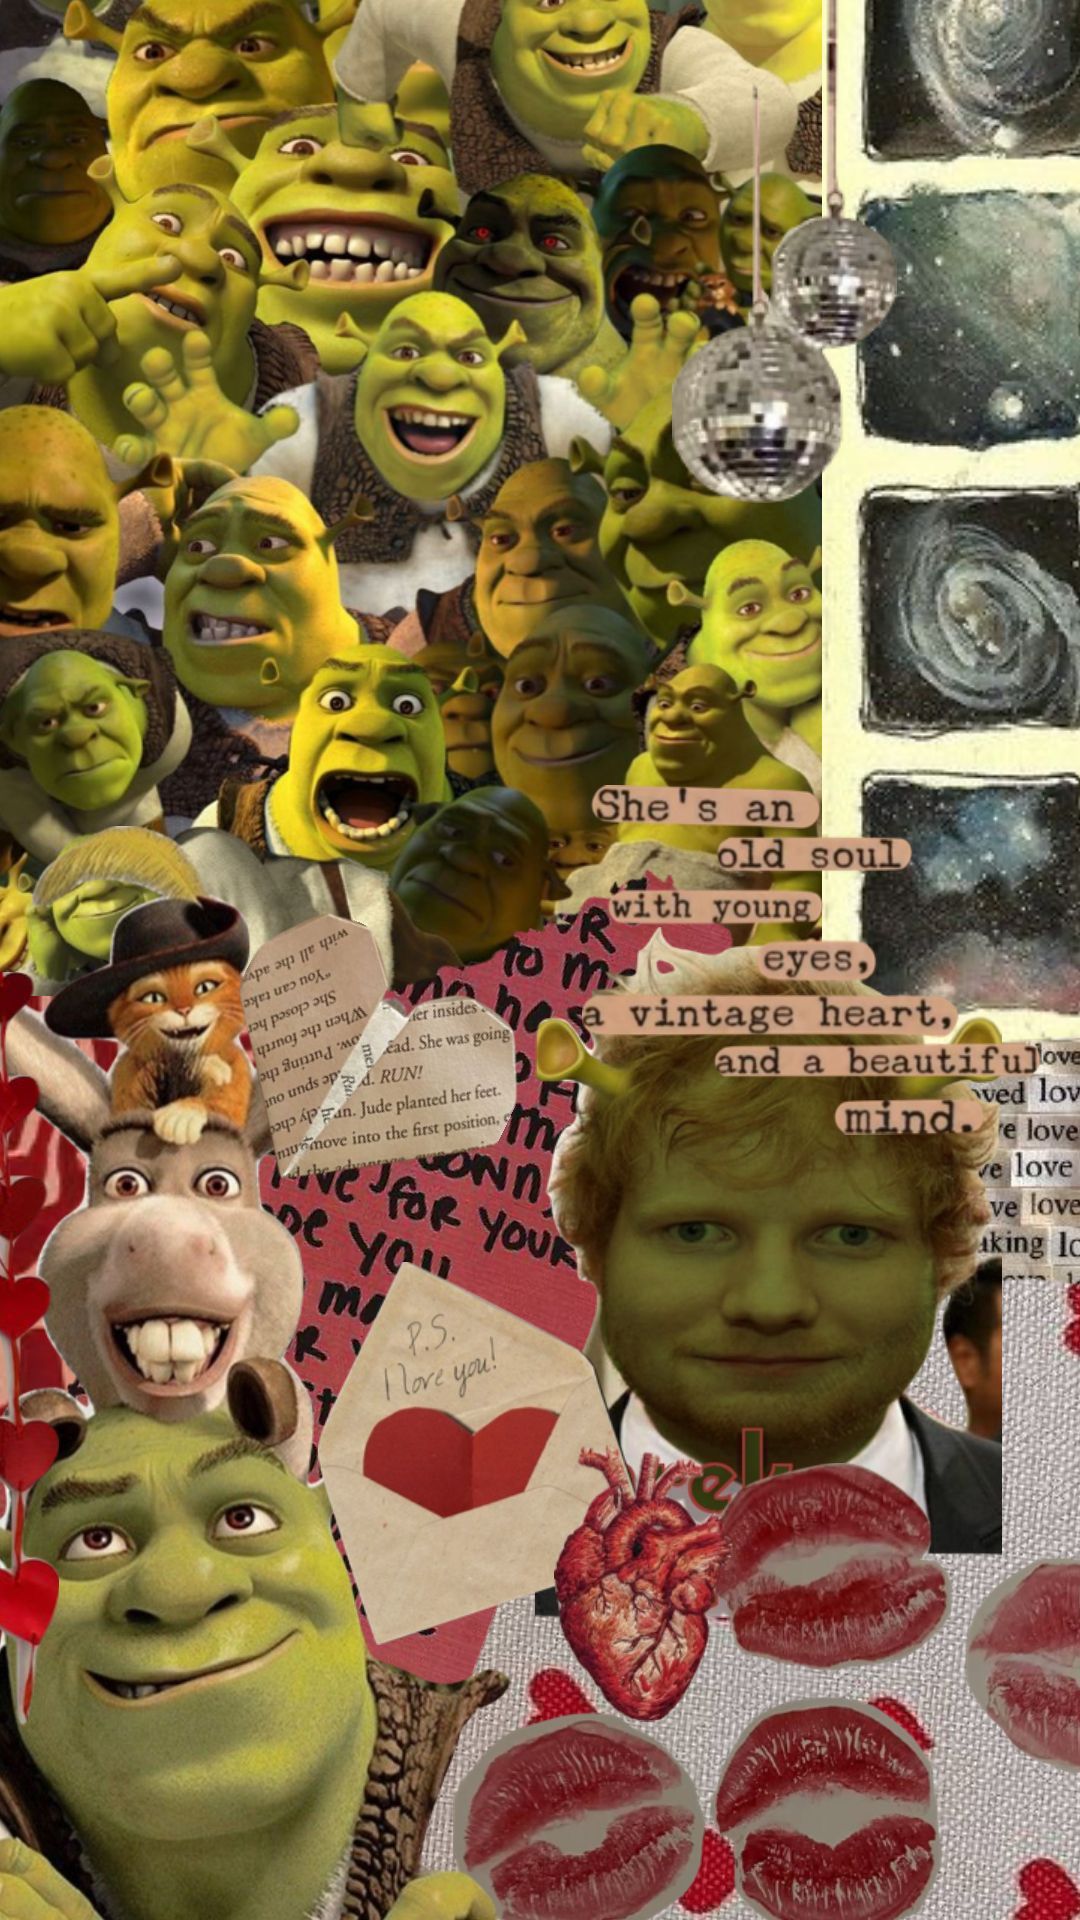 A collage of pictures with shrek and other characters - Shrek